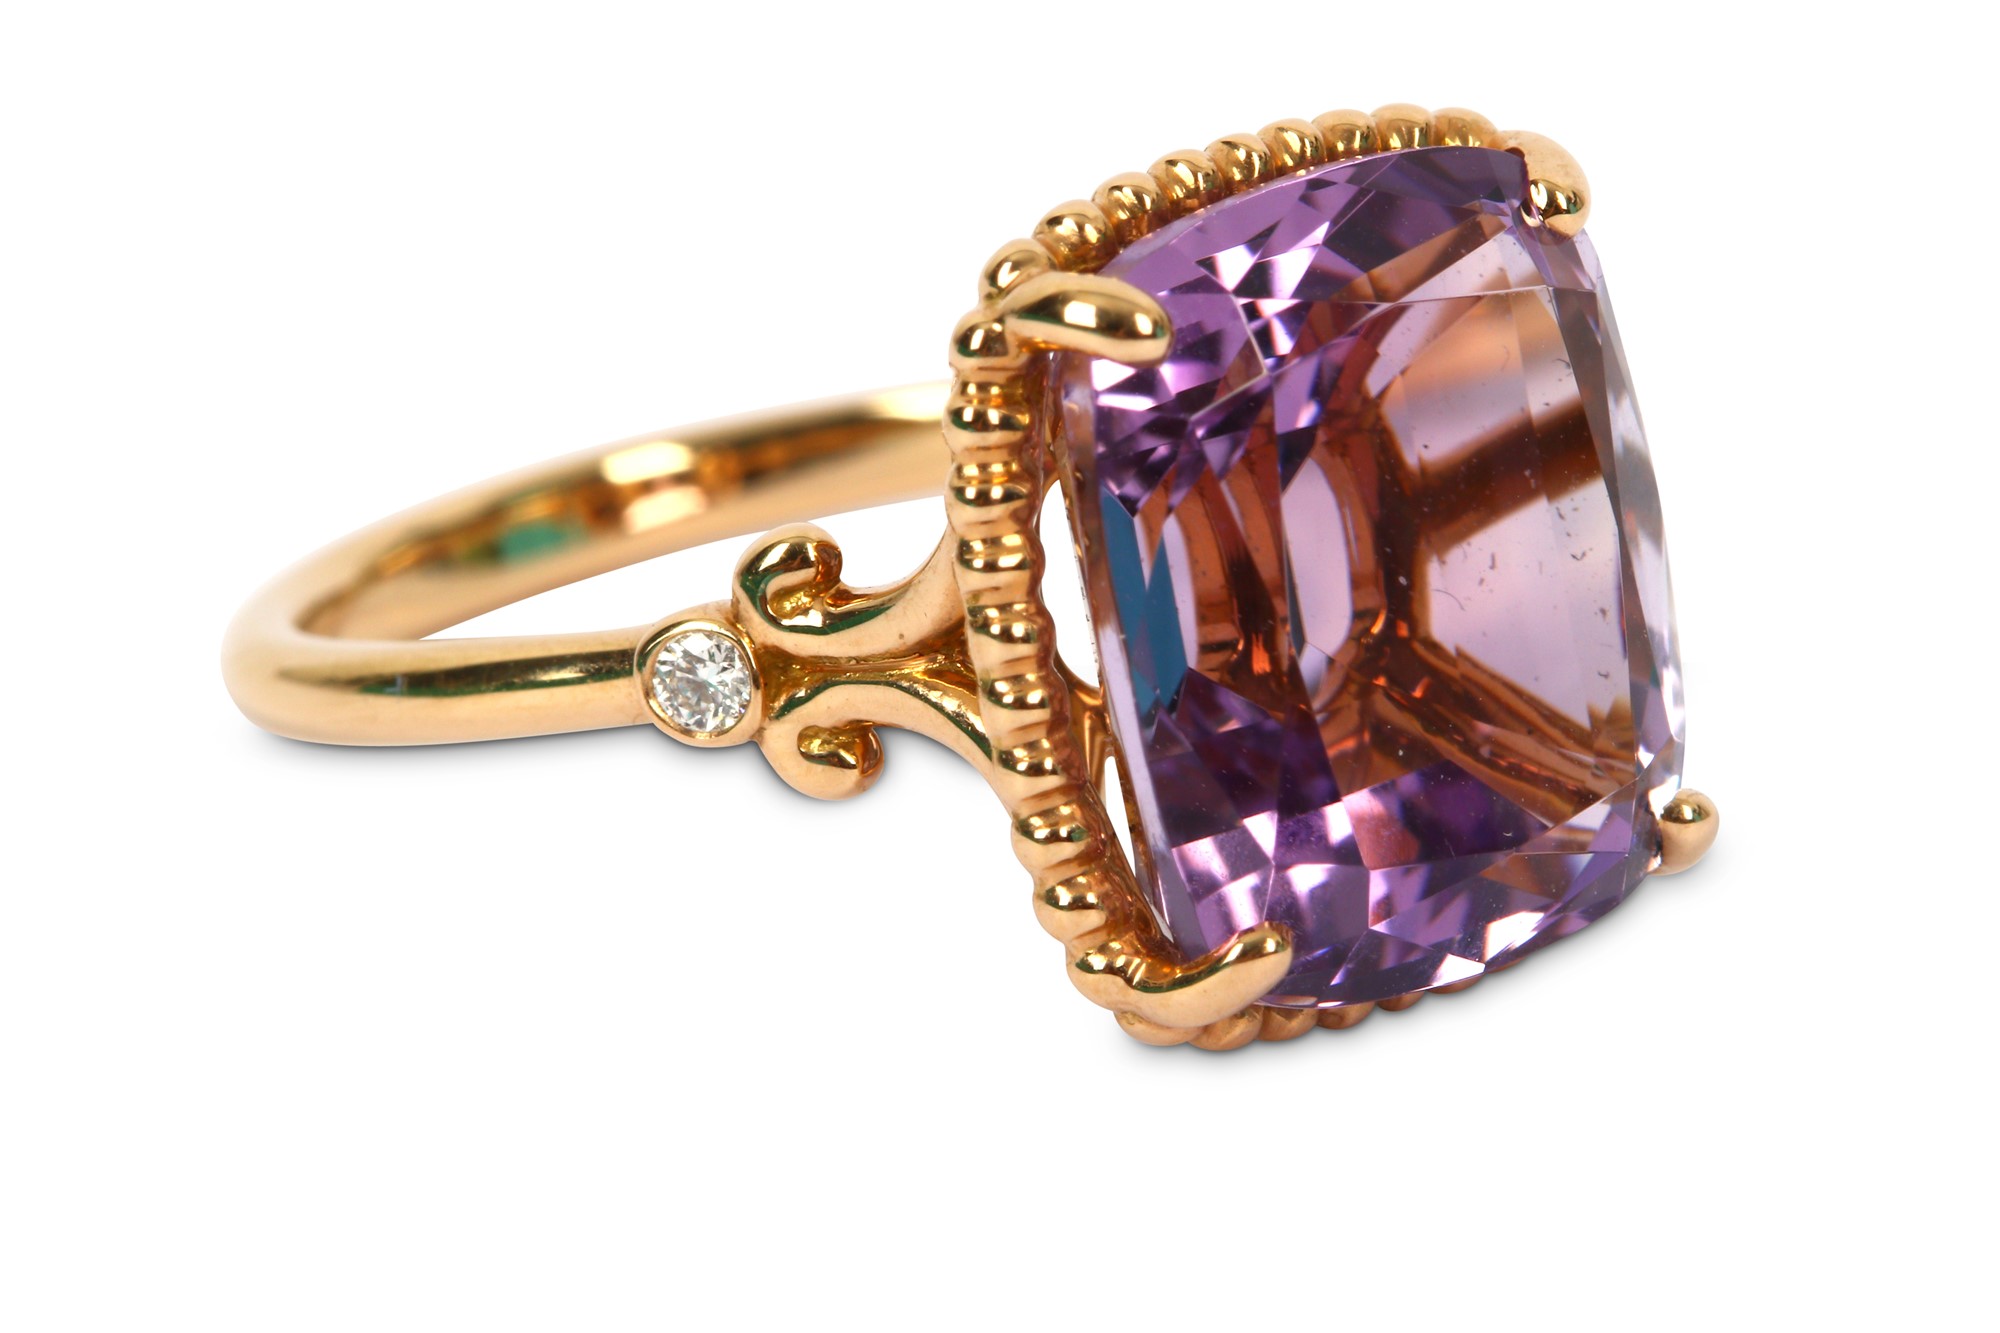 An amethyst and diamond ring, by Tiffany & Co.